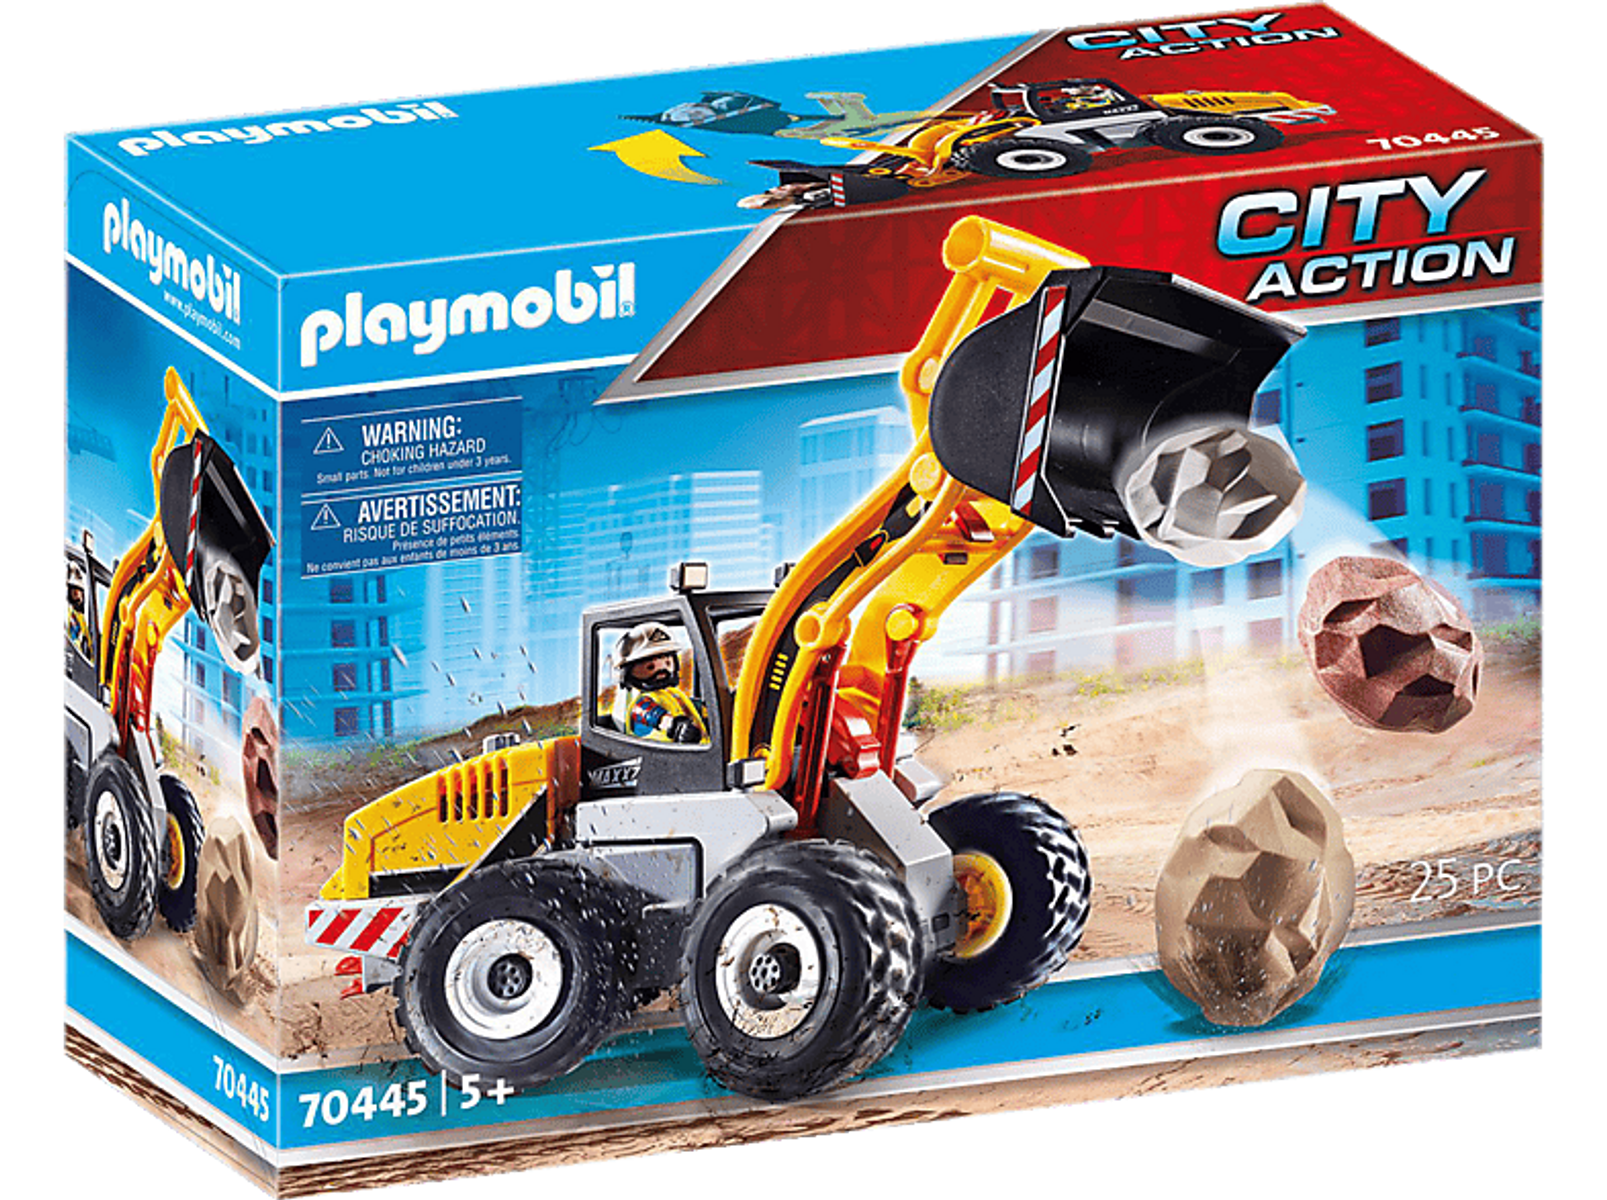 PLAYMOBIL 70445 Spielzeugsets